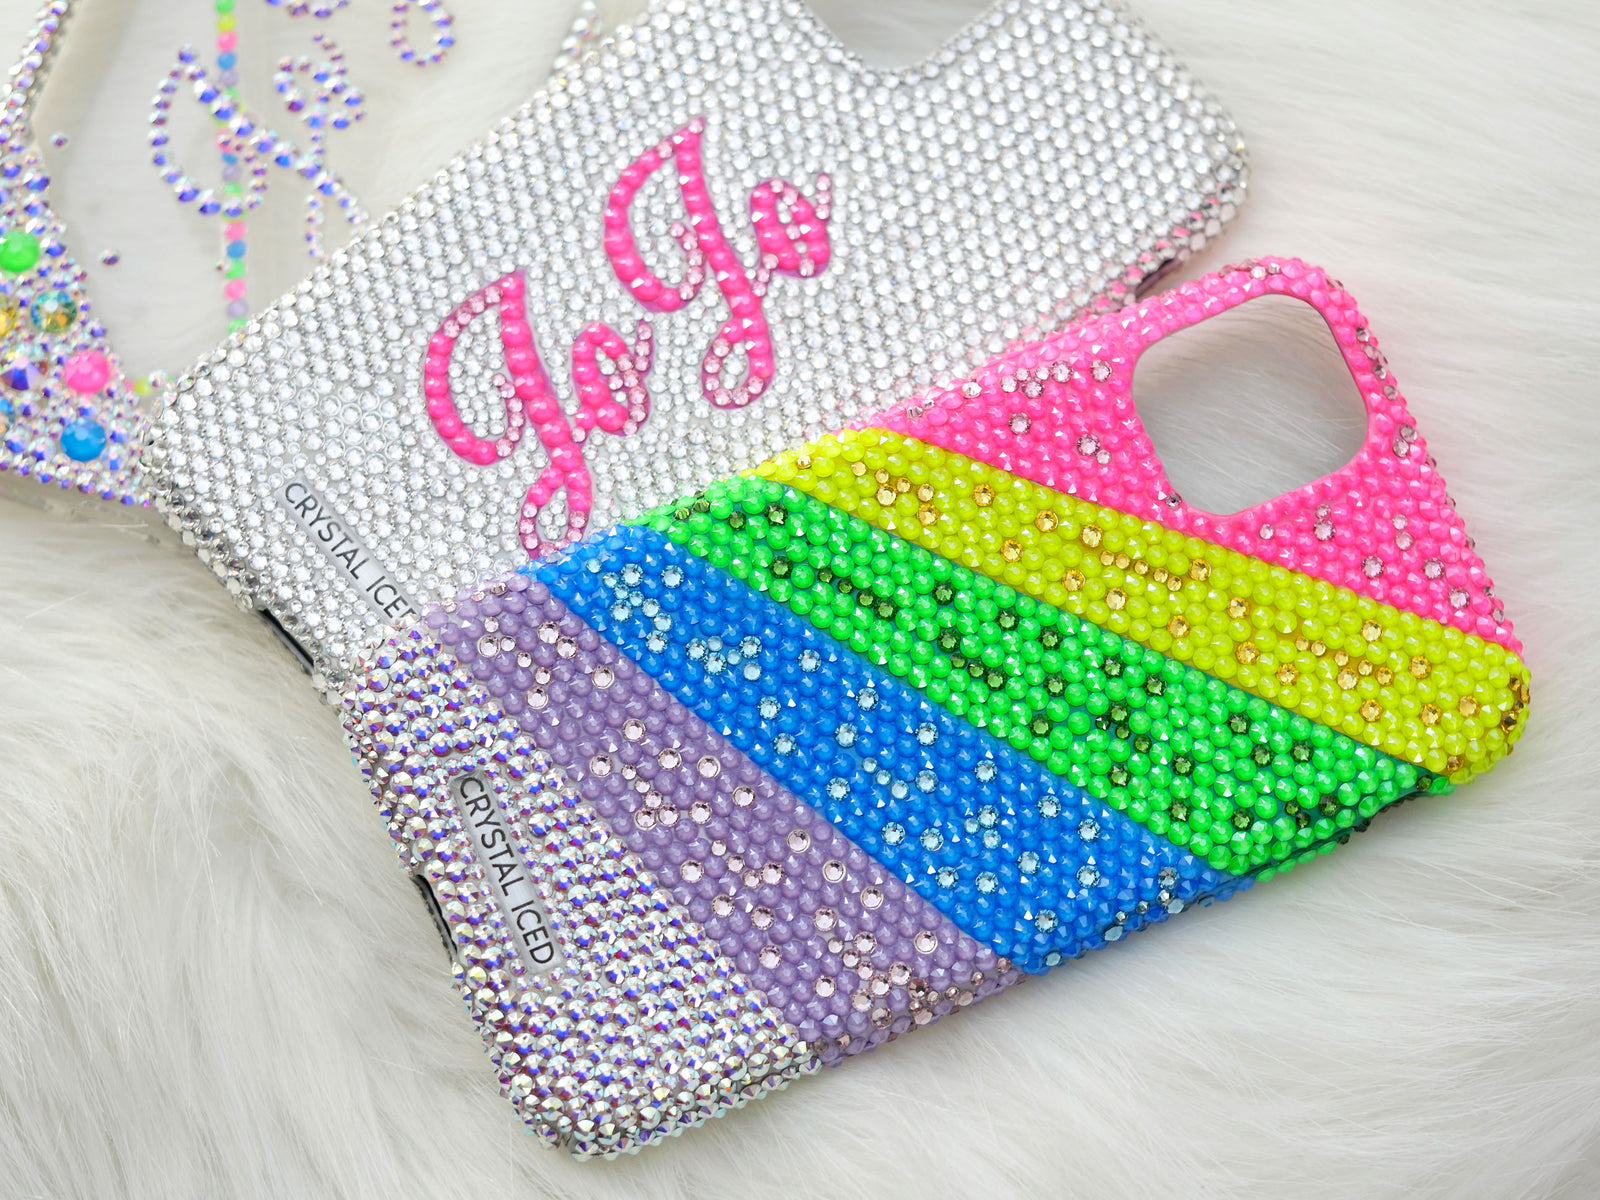 Designs made for JoJo Siwa by Crystal Iced